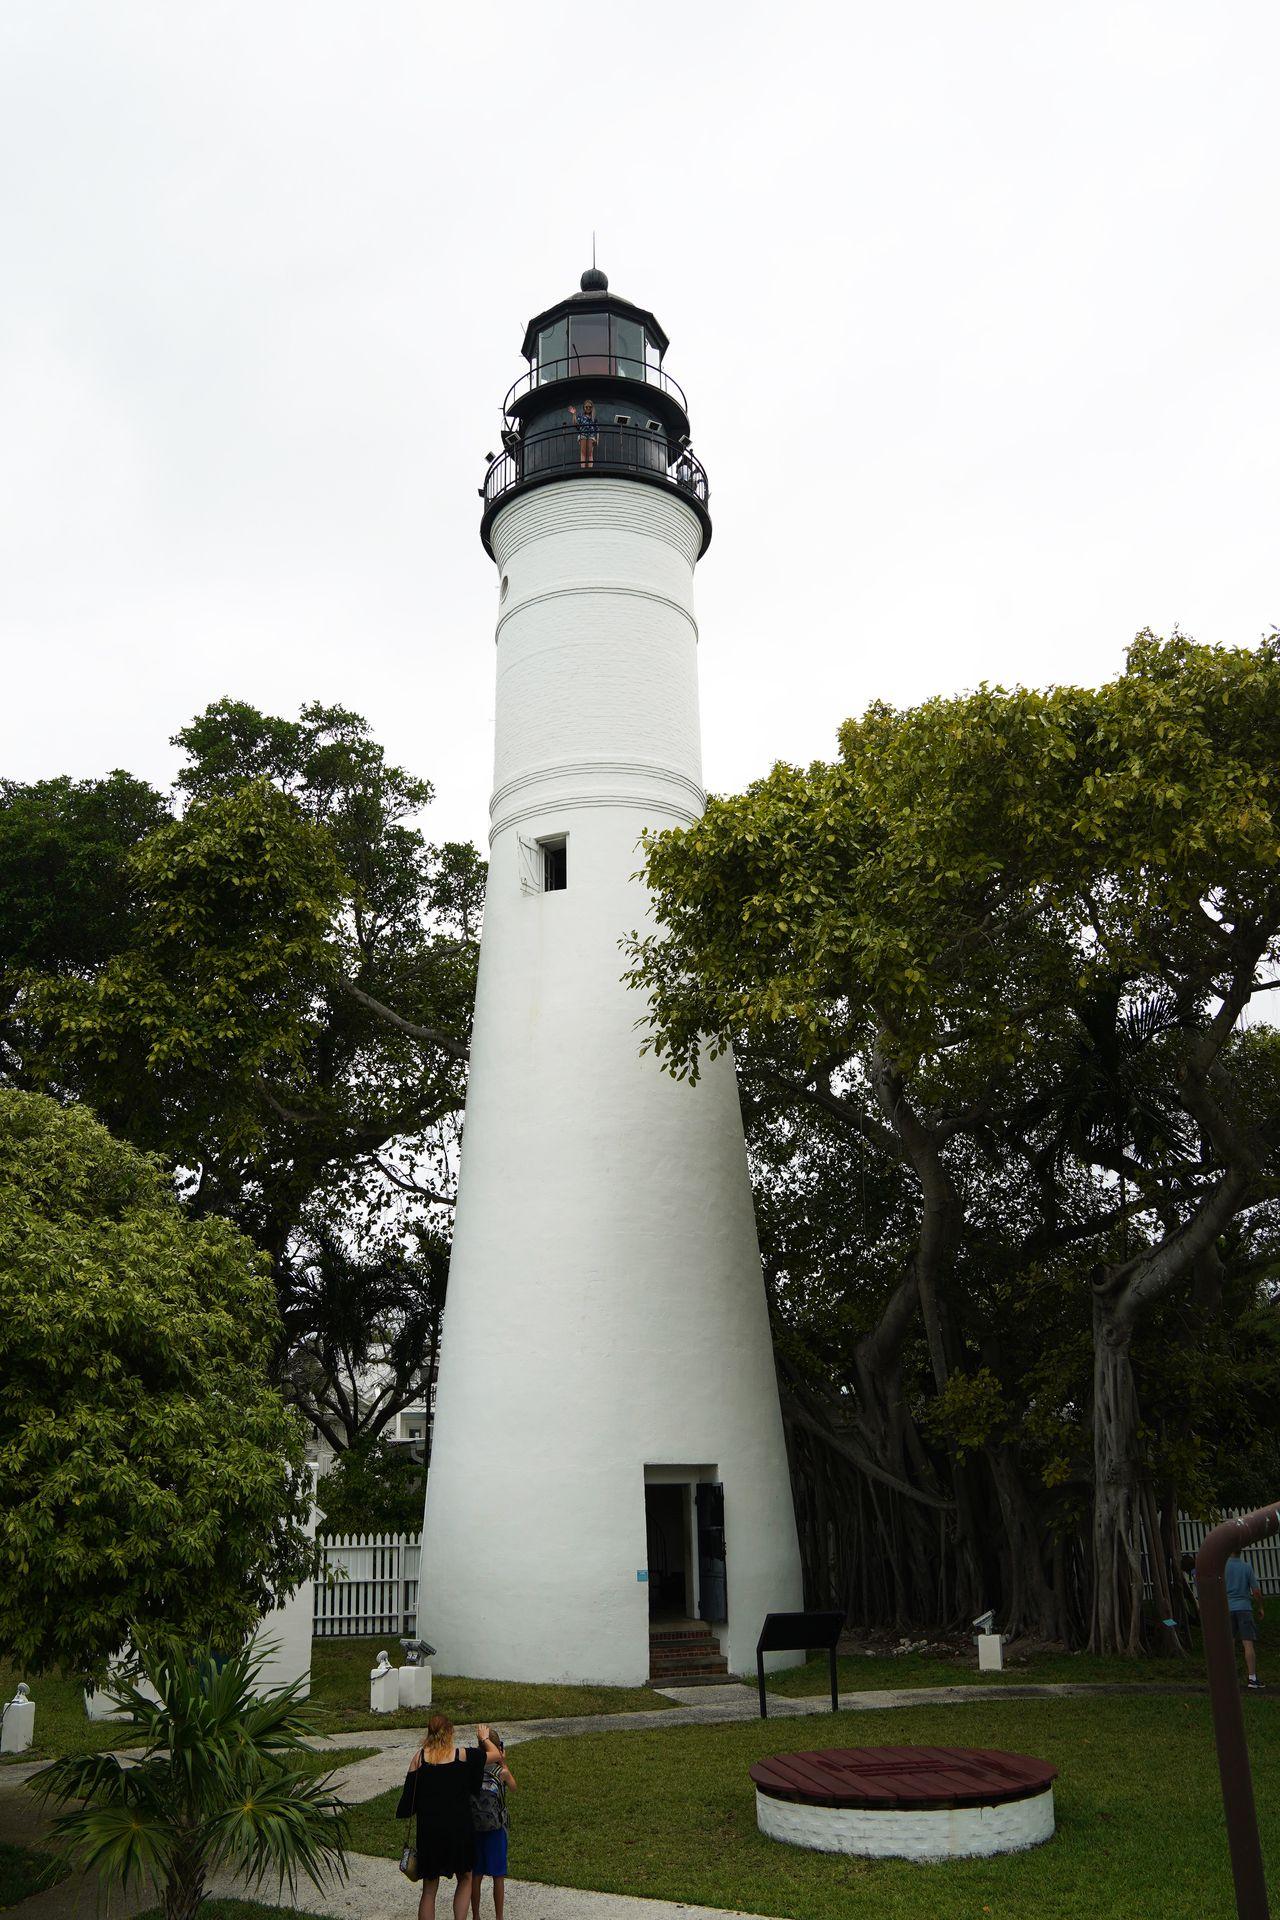 A white lighthouse surrounded by trees